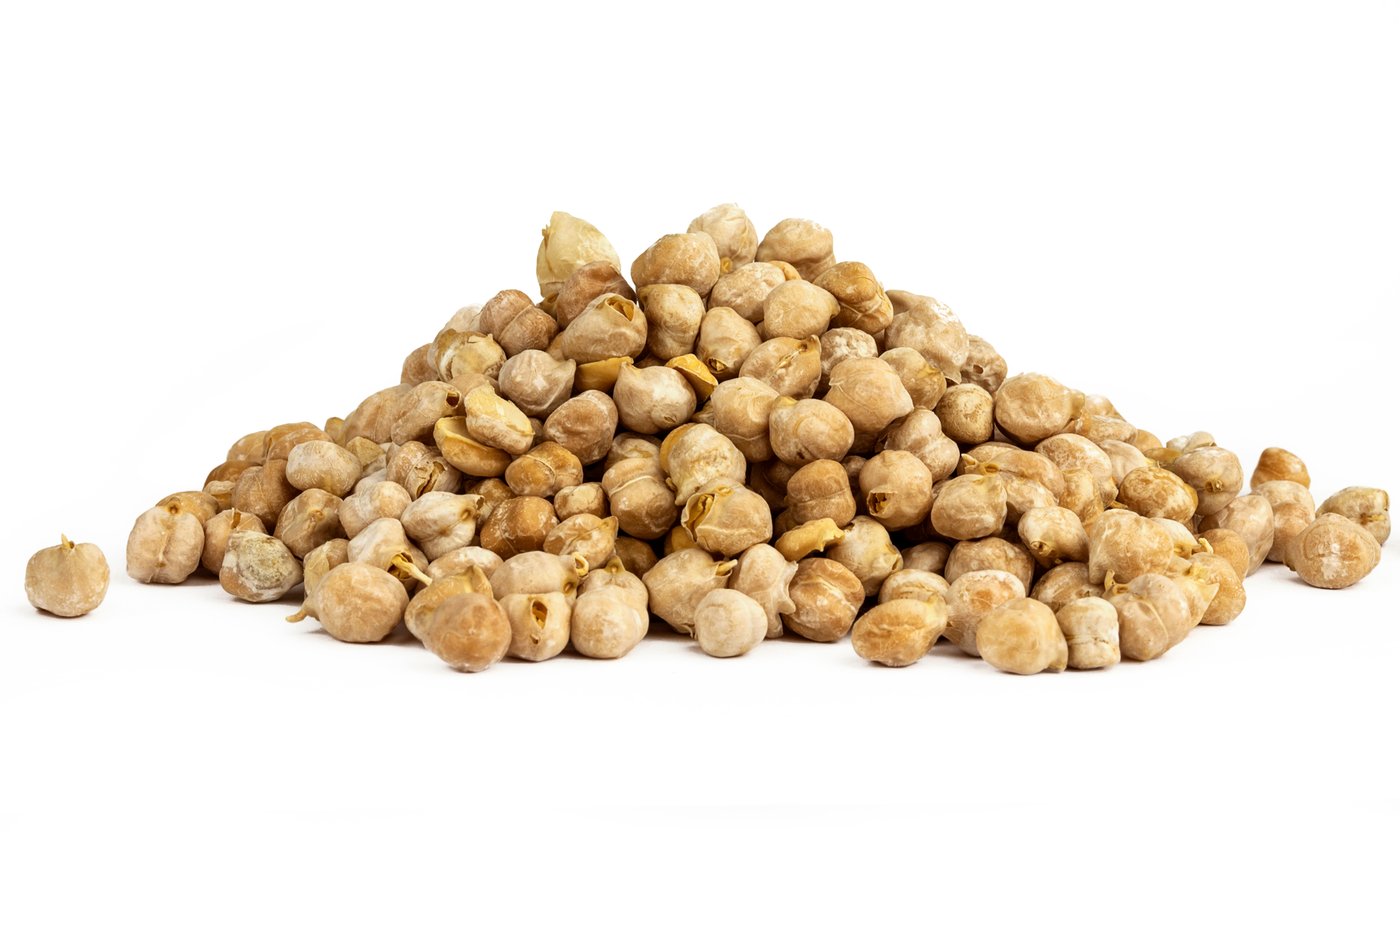 Organic Sprouted Chickpeas image zoom